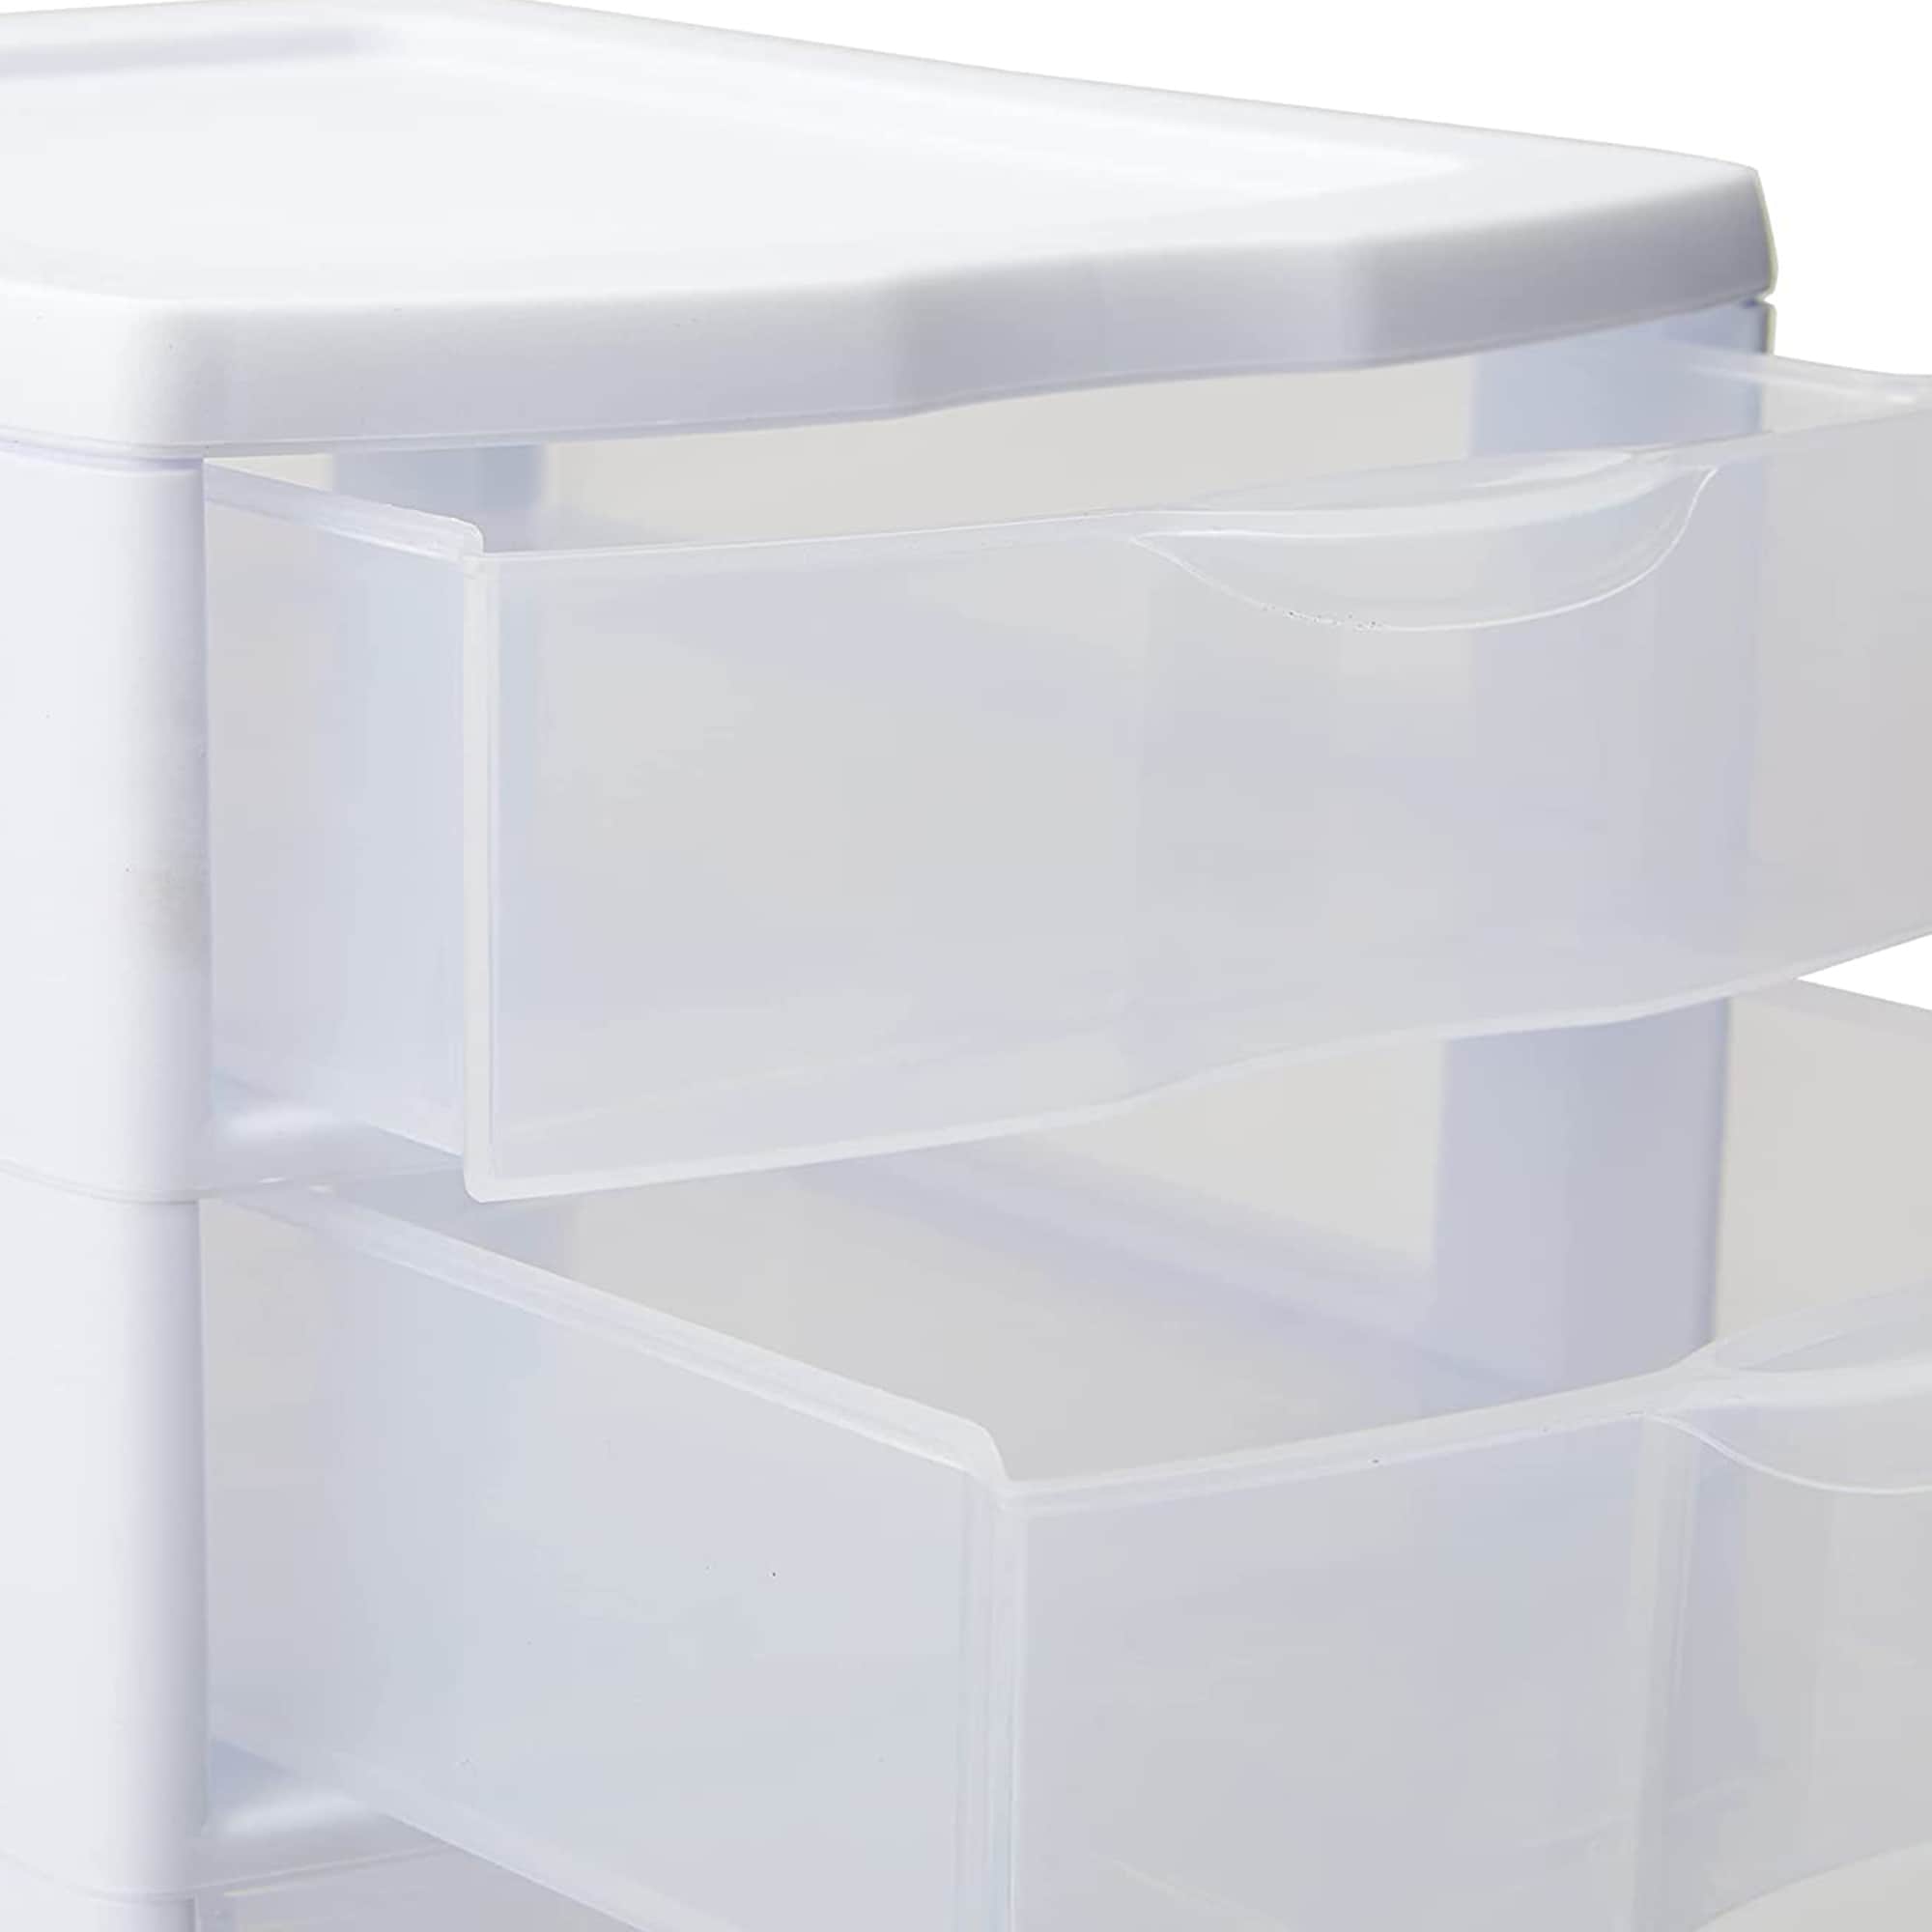 Sterilite ClearView Small 5-Drawer Organizer - White/Clear, 1 ct - Kroger